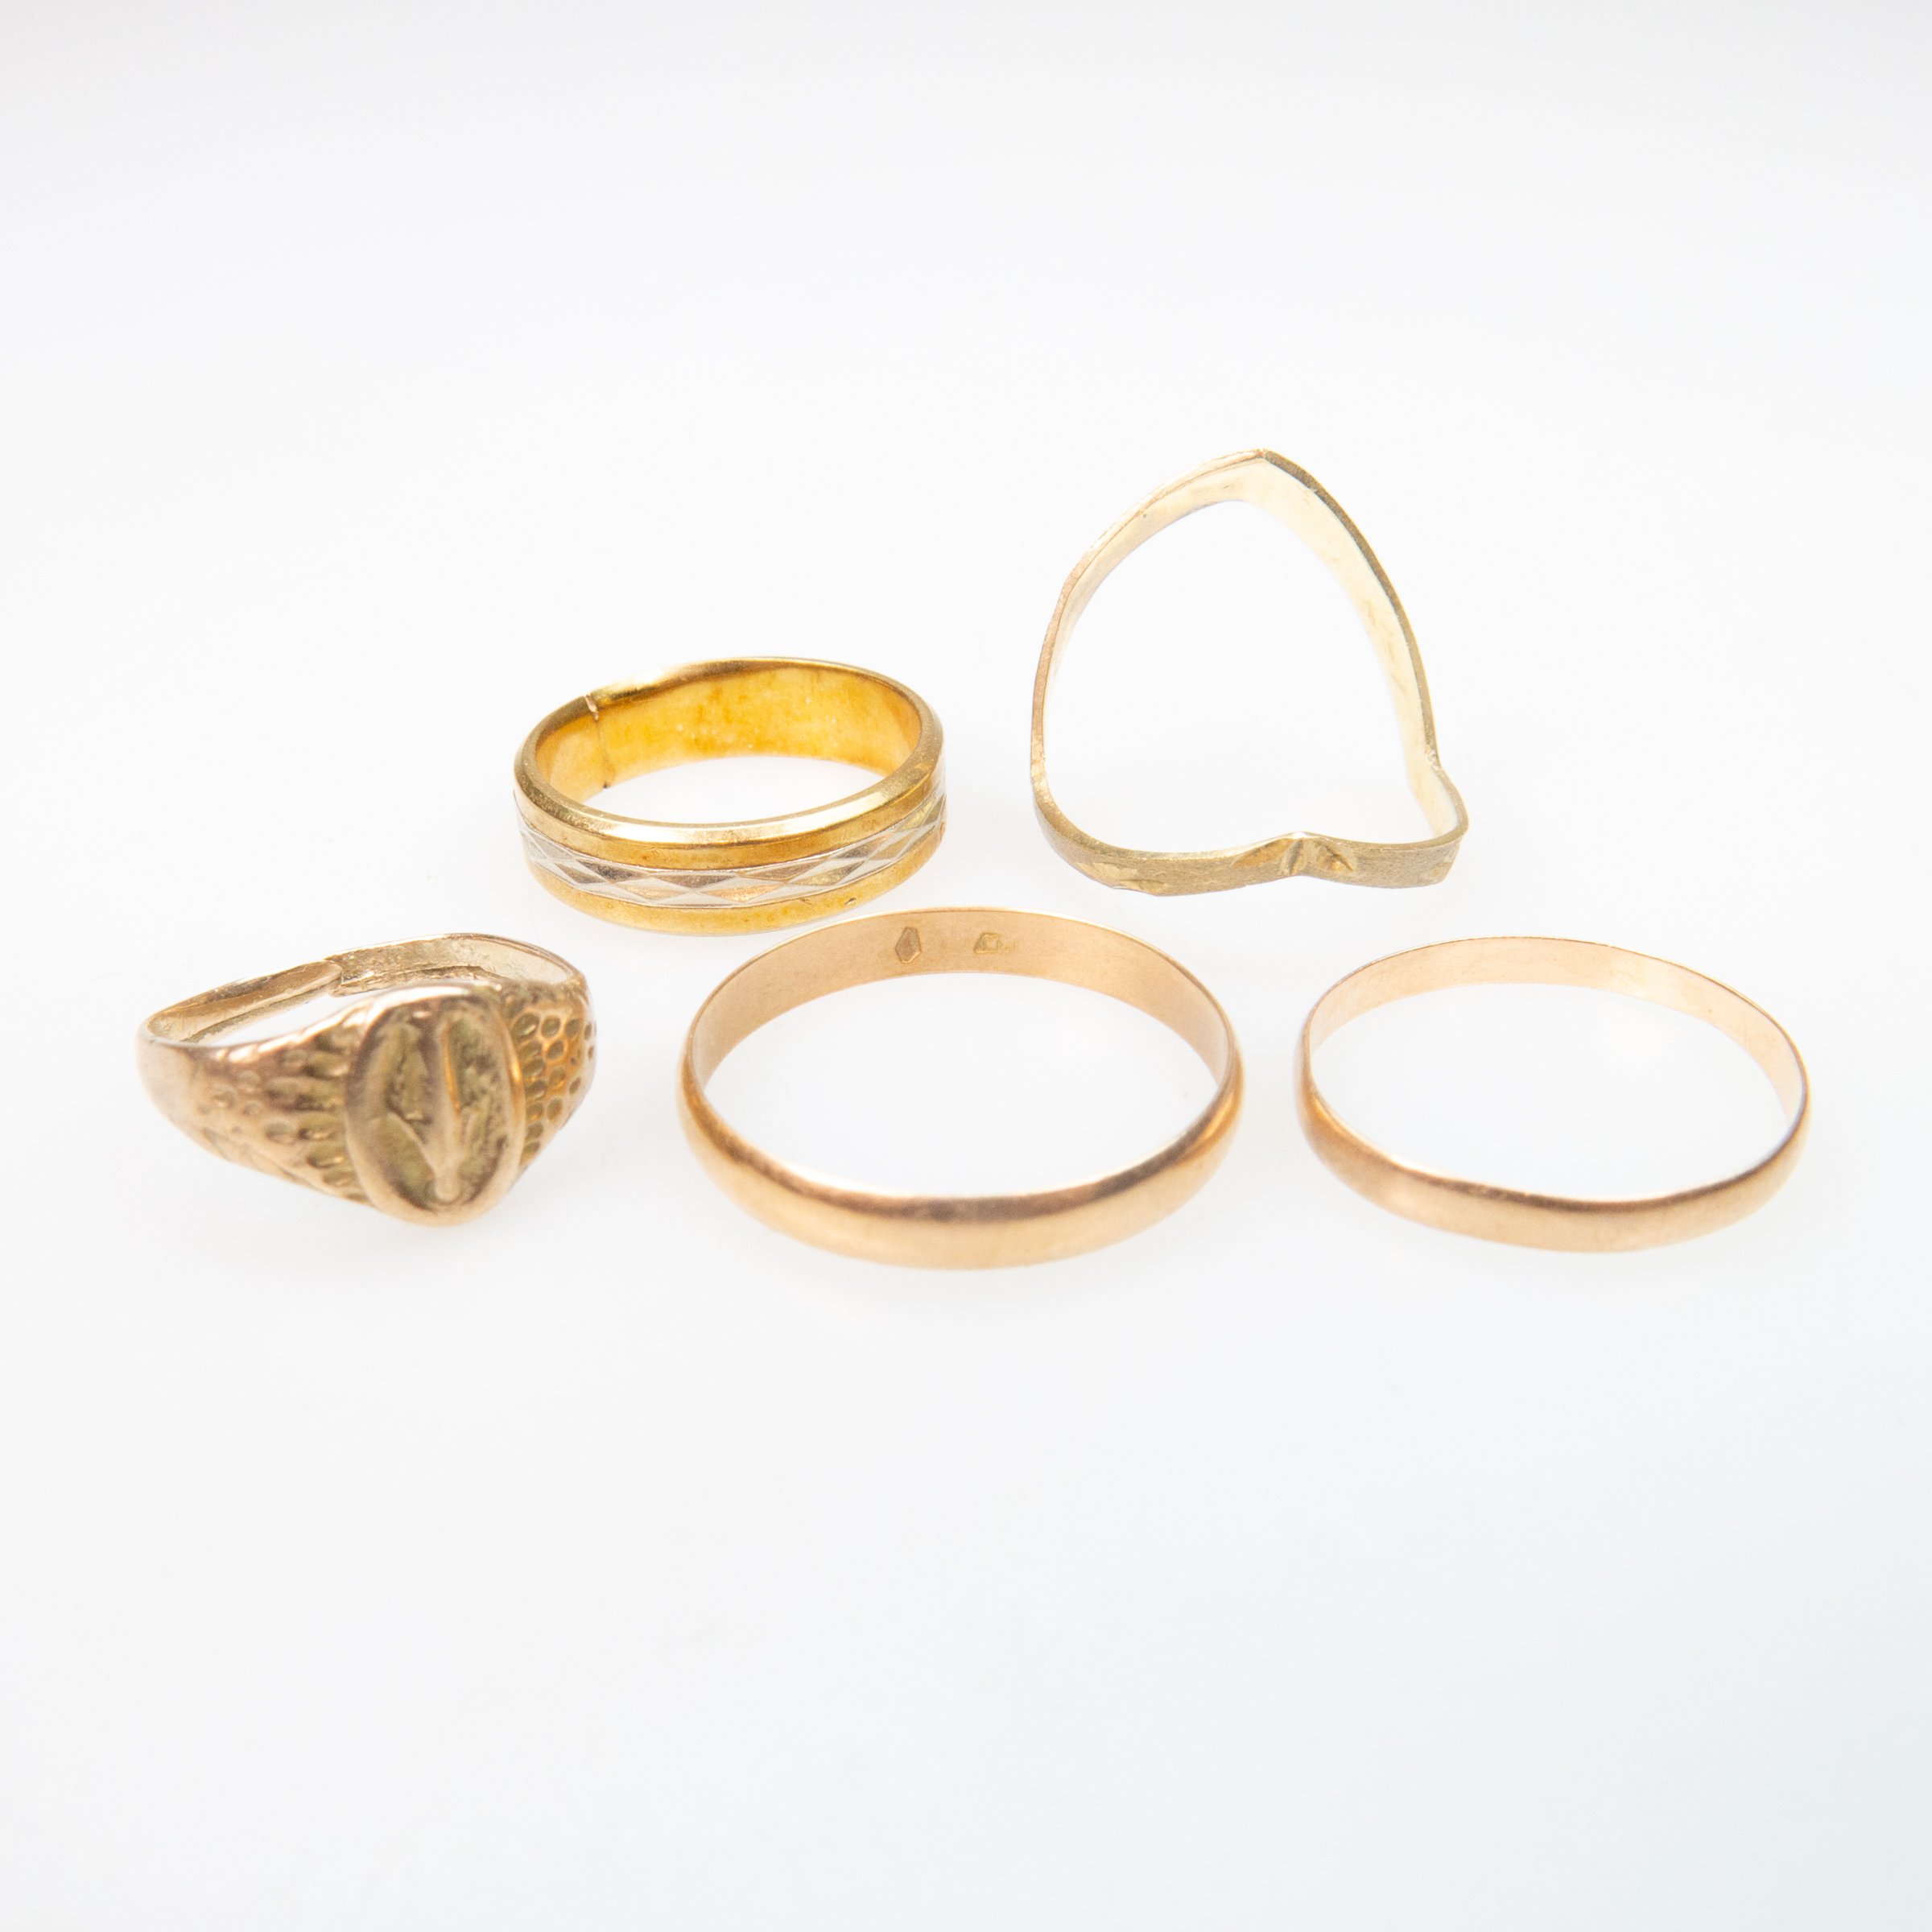 1 x 18k, 4 x 14k & 5 x 10k Gold Rings And Bands